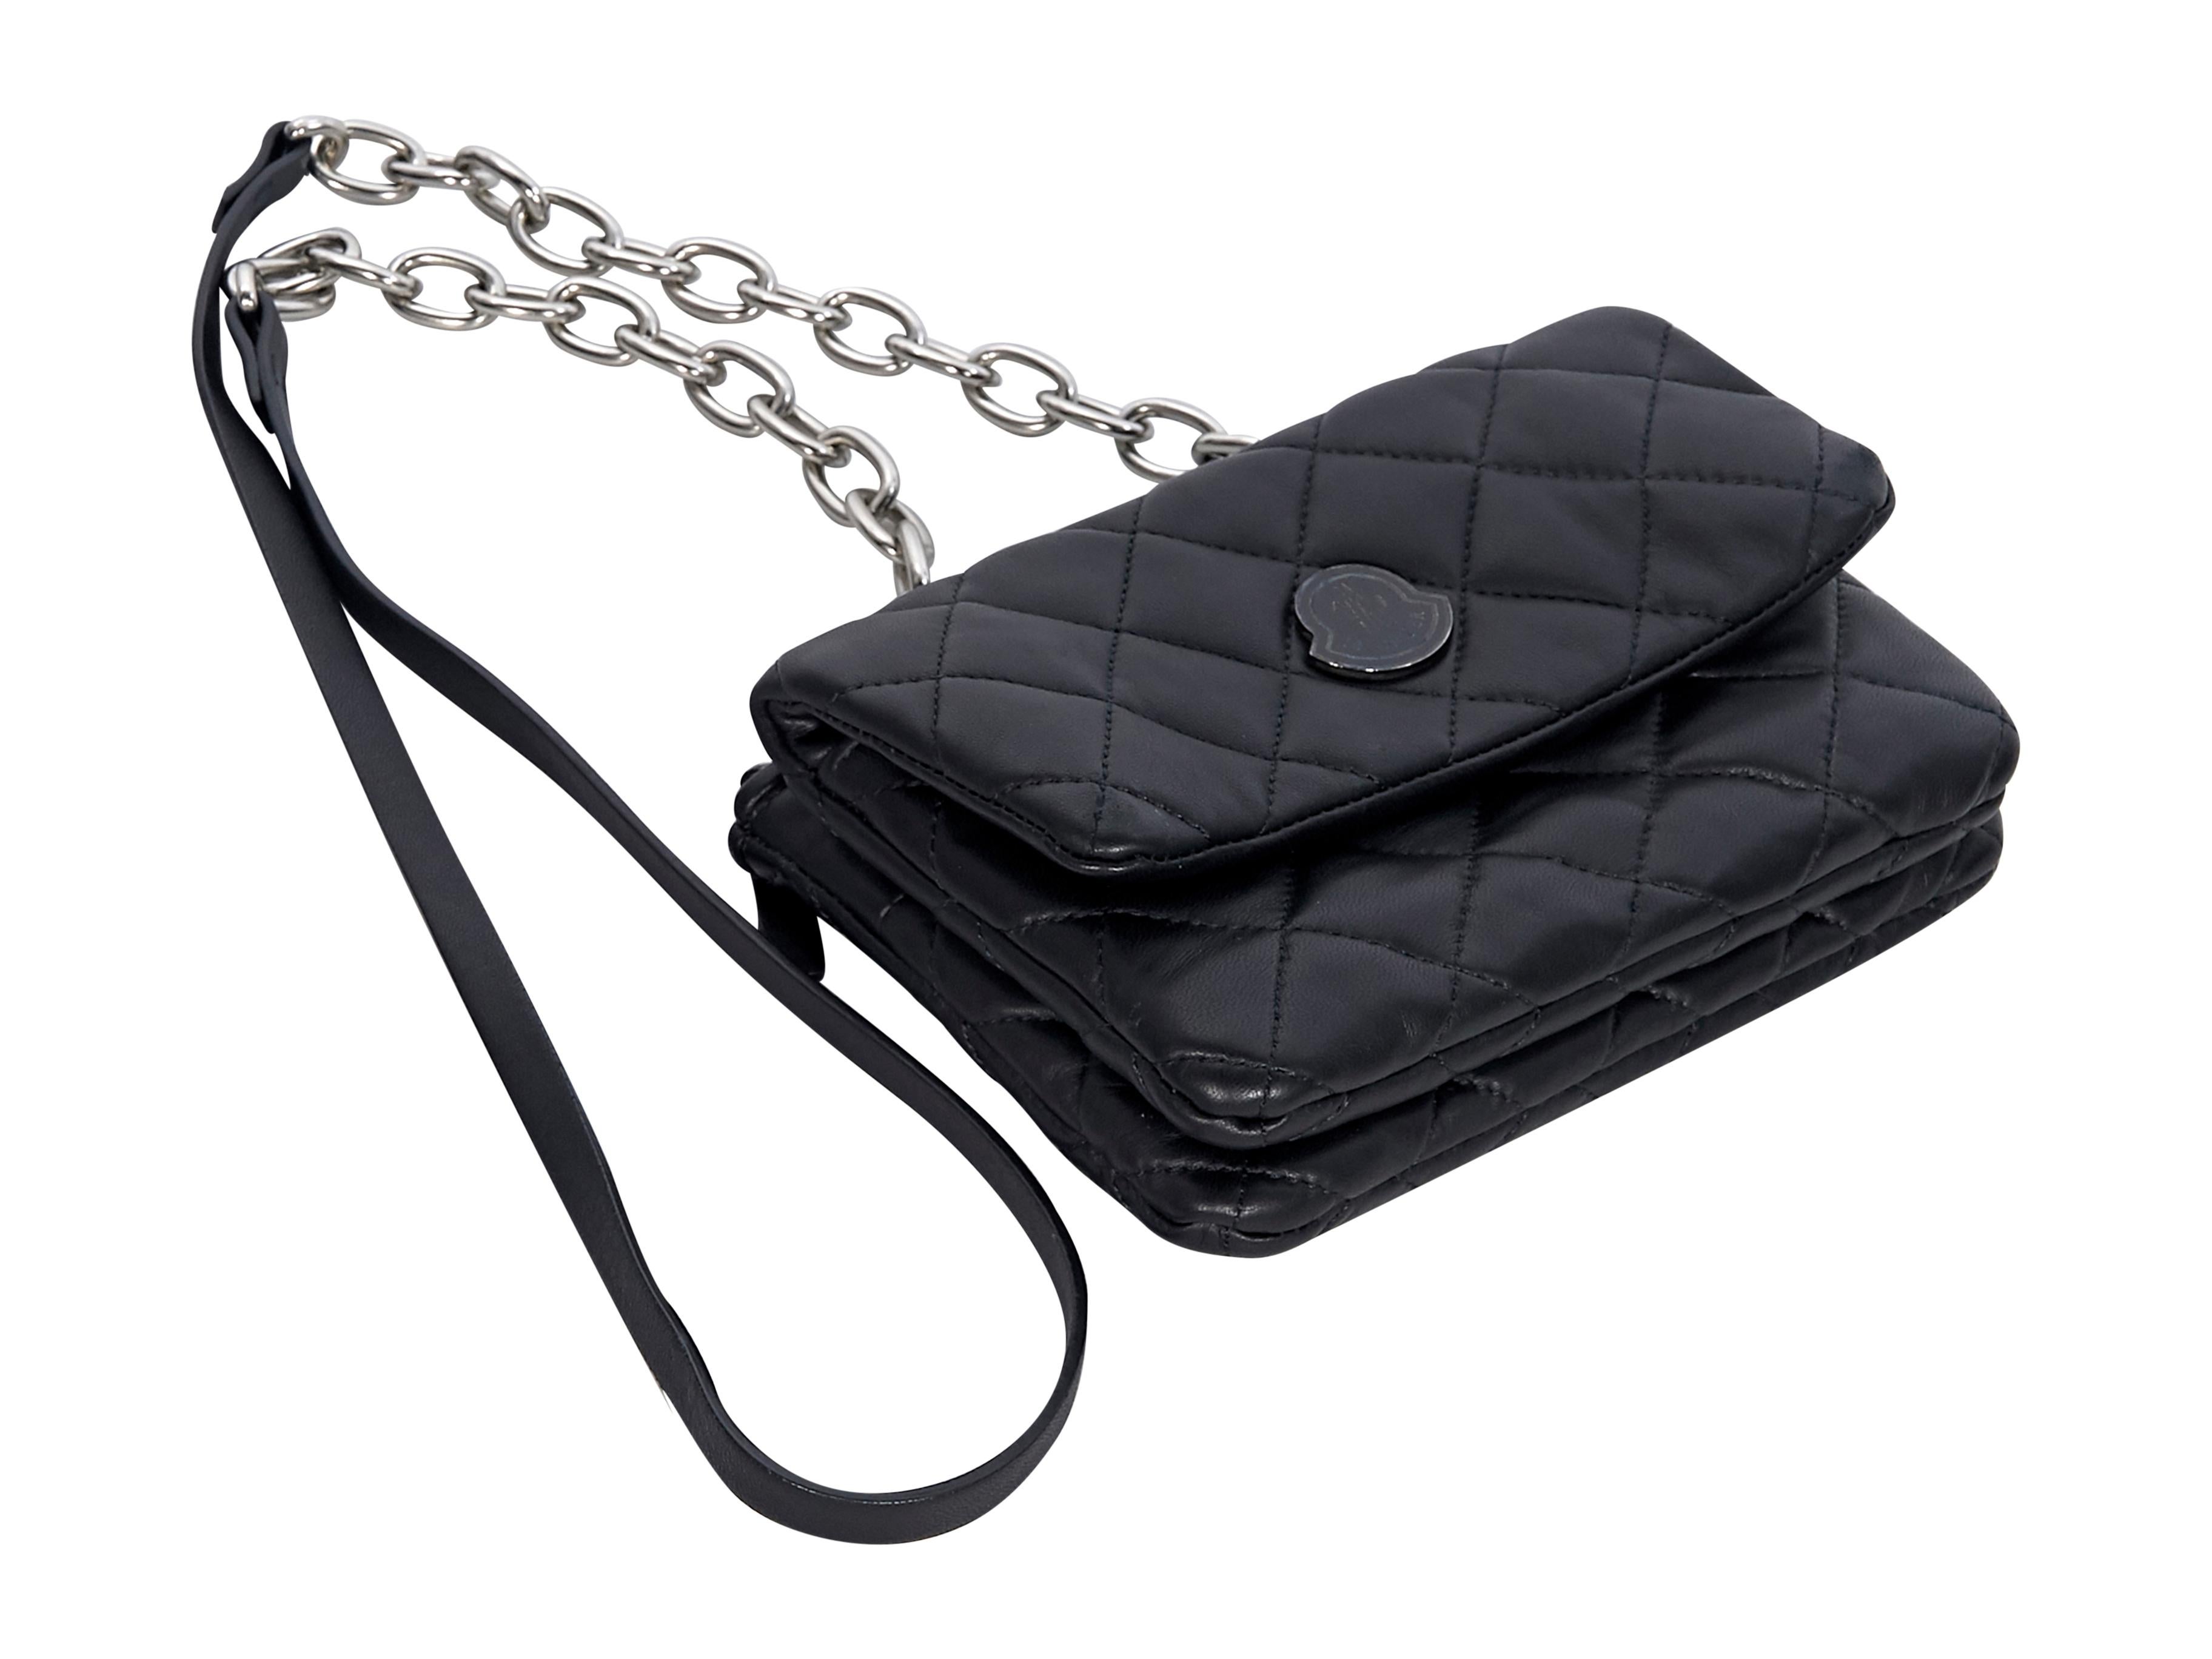 Product details: Black leather quilted crossbody bag by Moncler. Single chain and leather shoulder straps.  Front flap with snap button closure. Lined interior. Top zip closure. Back exterior zip compartment with inner zip pocket. Silver-tone